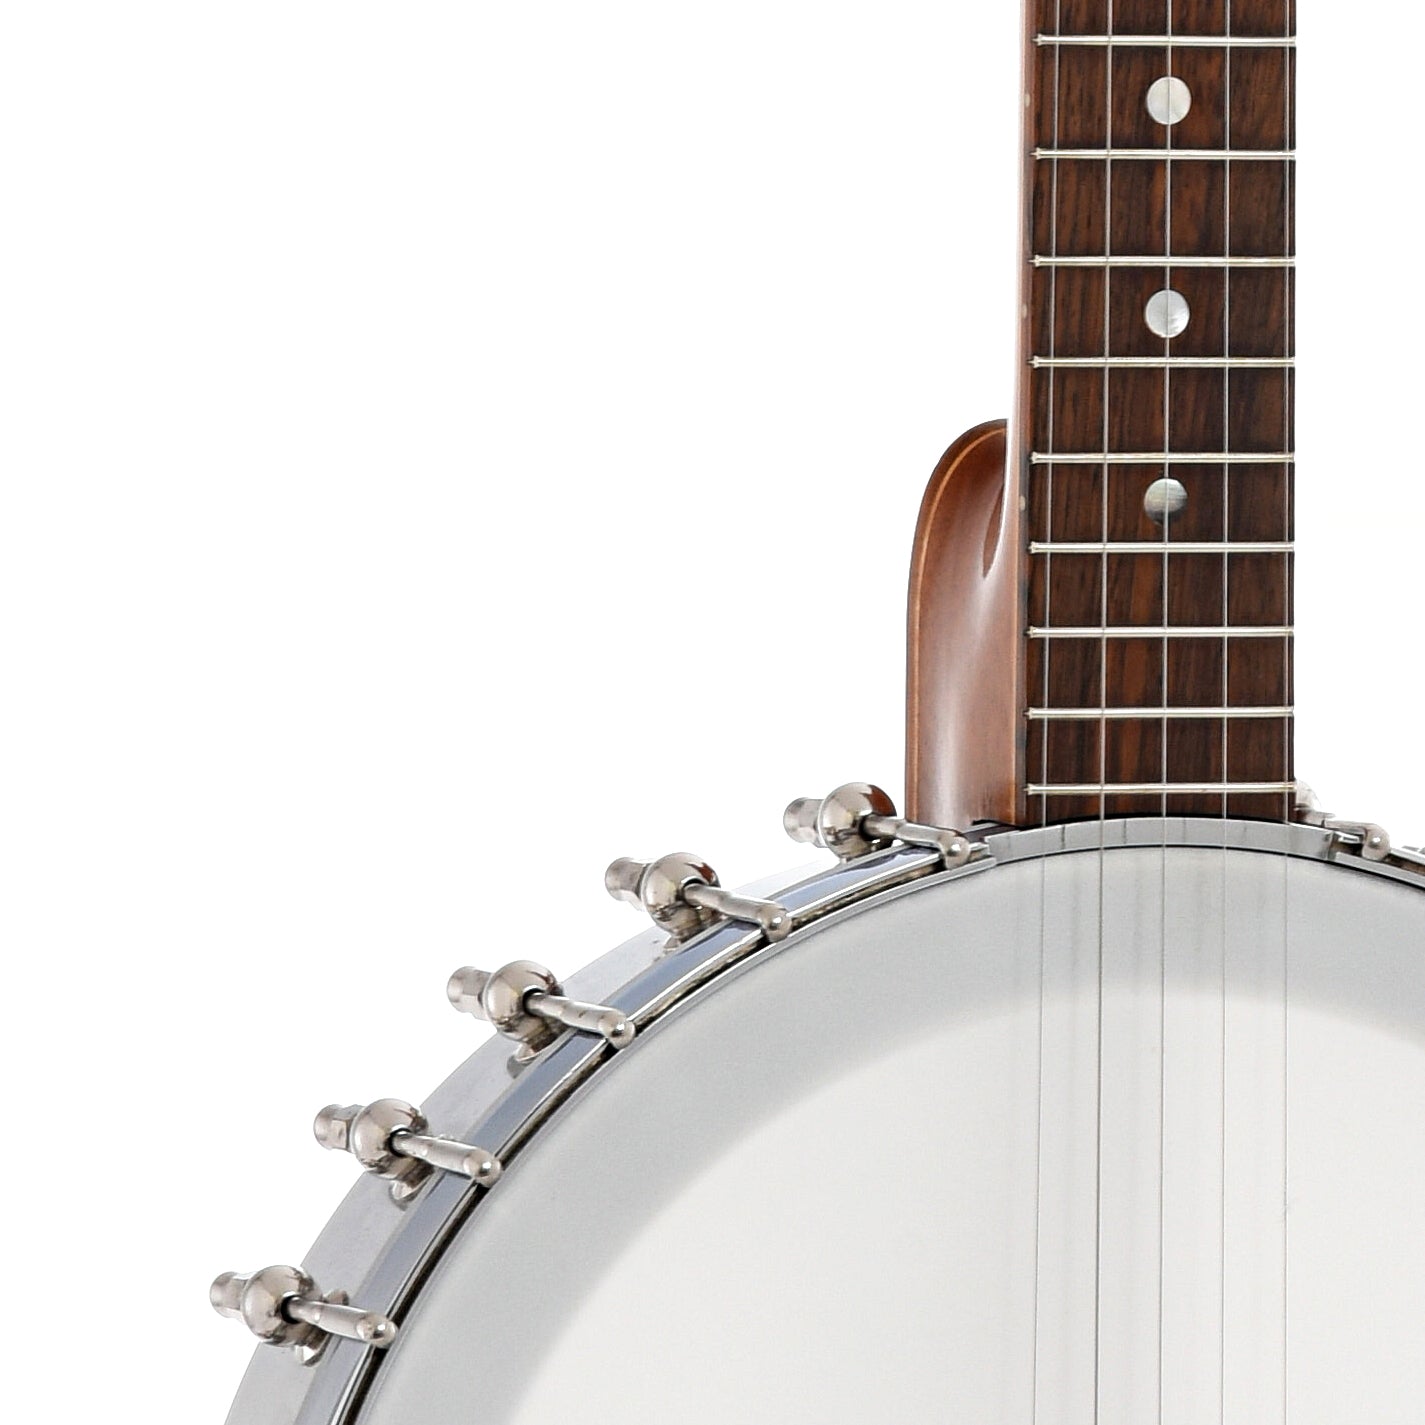 Fretboard and body join of Ode Model 33 Extra Longneck Banjo